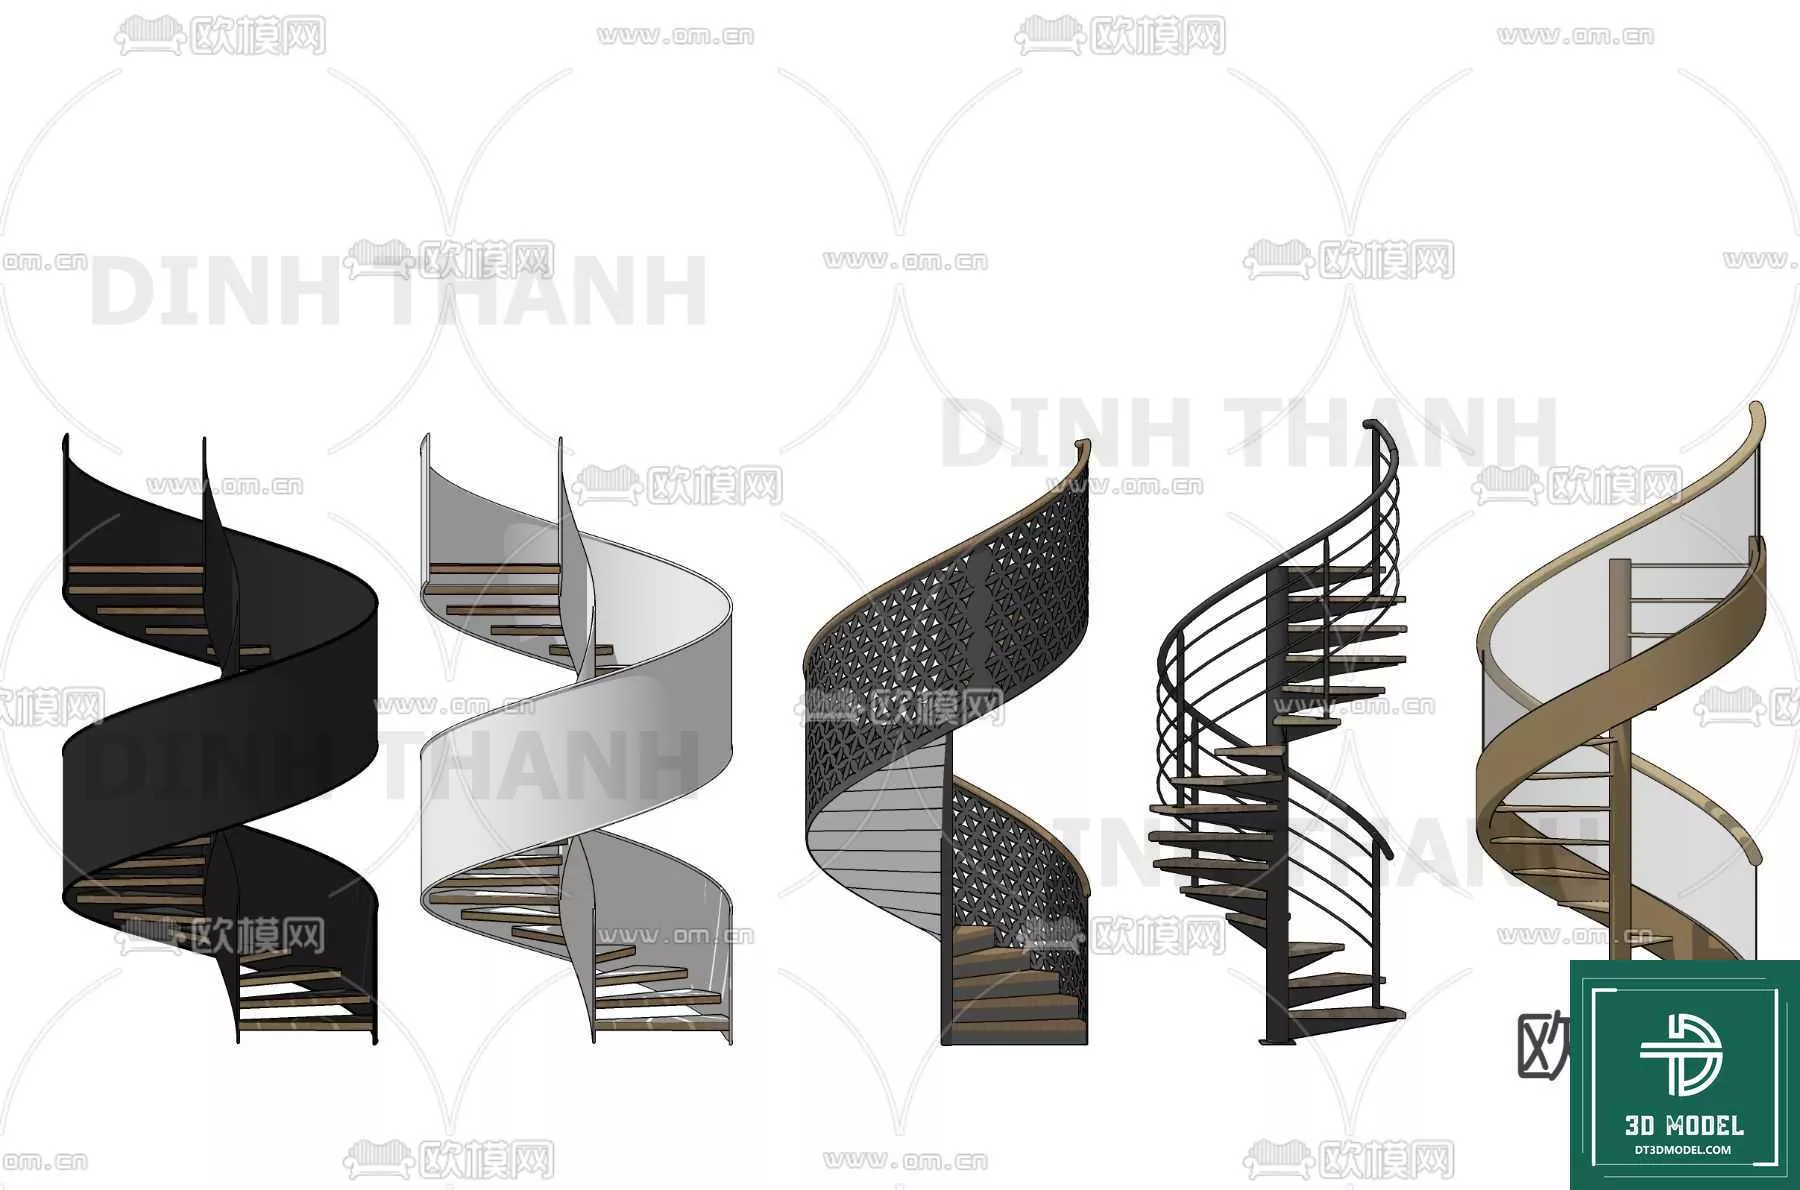 MODERN STAIR - SKETCHUP 3D MODEL - VRAY OR ENSCAPE - ID14243